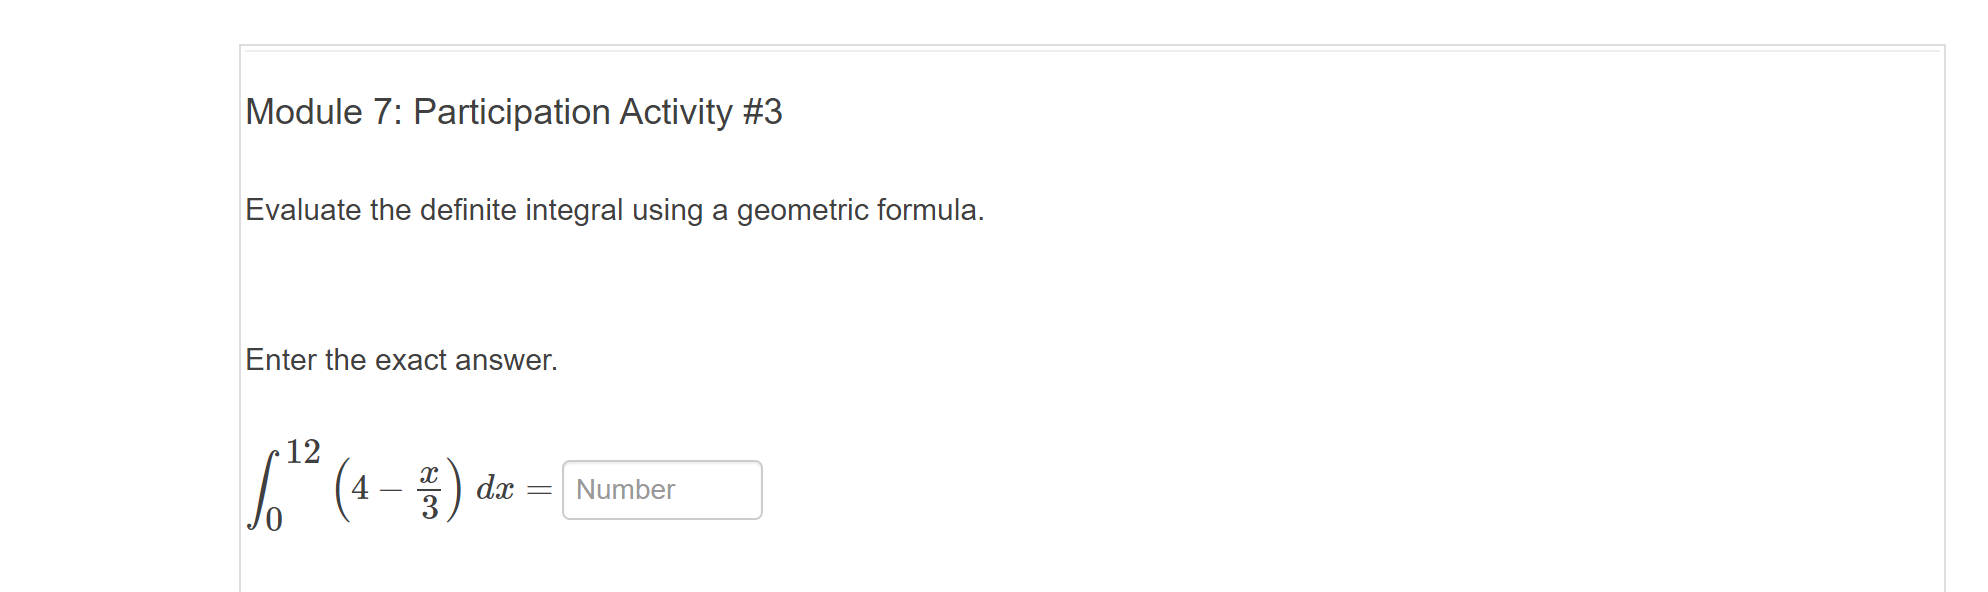 Evaluate the definite integral using a geometric formula.
Enter the exact answer.
12
(4
dx
Number
-
